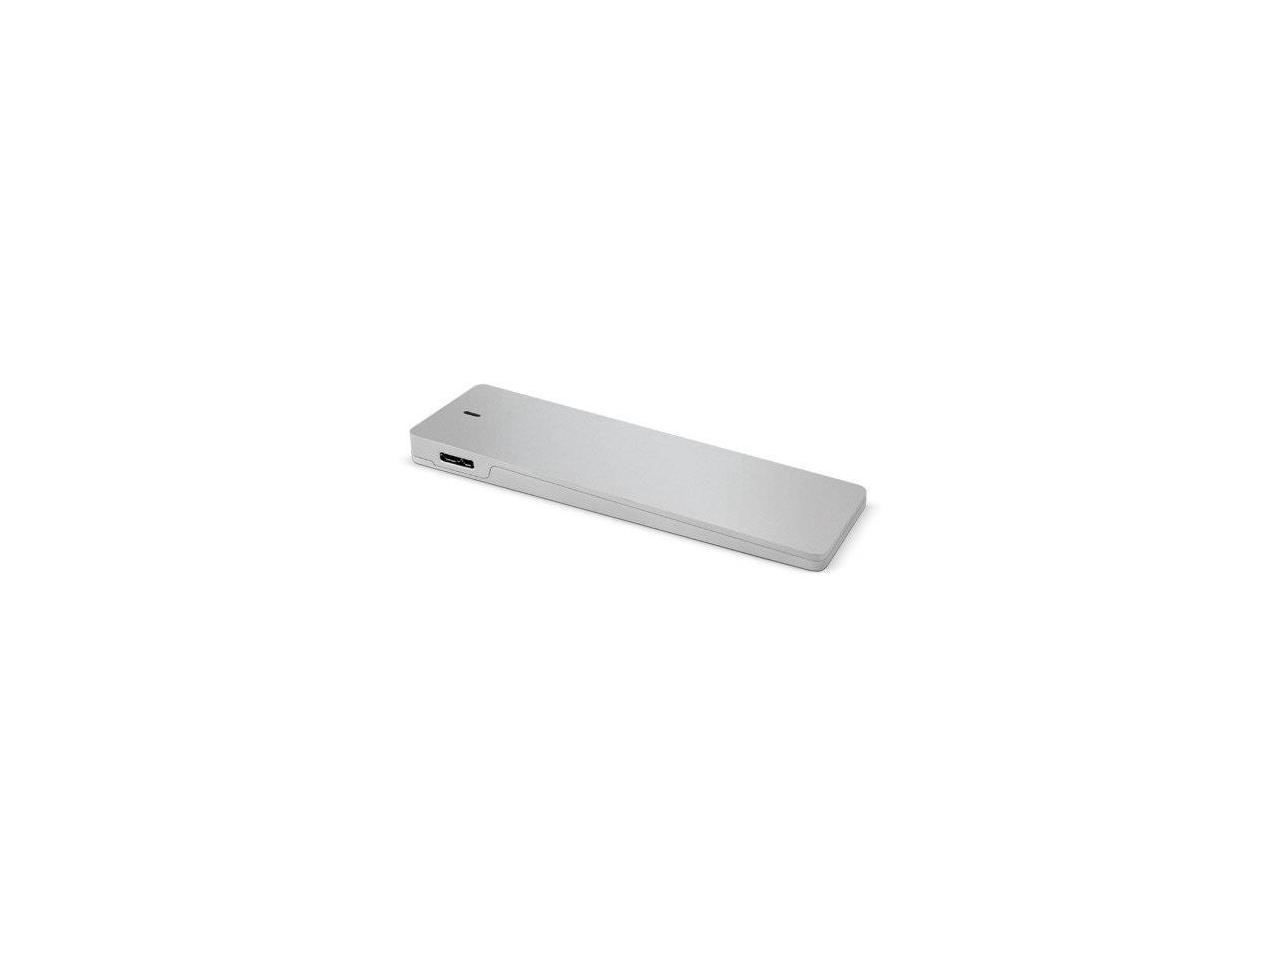 OWC Envoy USB 2.0/3.0 Enclosure for data transfer/continued external use of Apple MacBook Air 2010/11 SSD. Plug and Play, Bus-powered no AC power adapter required. model OWCMAU3ENVOY11